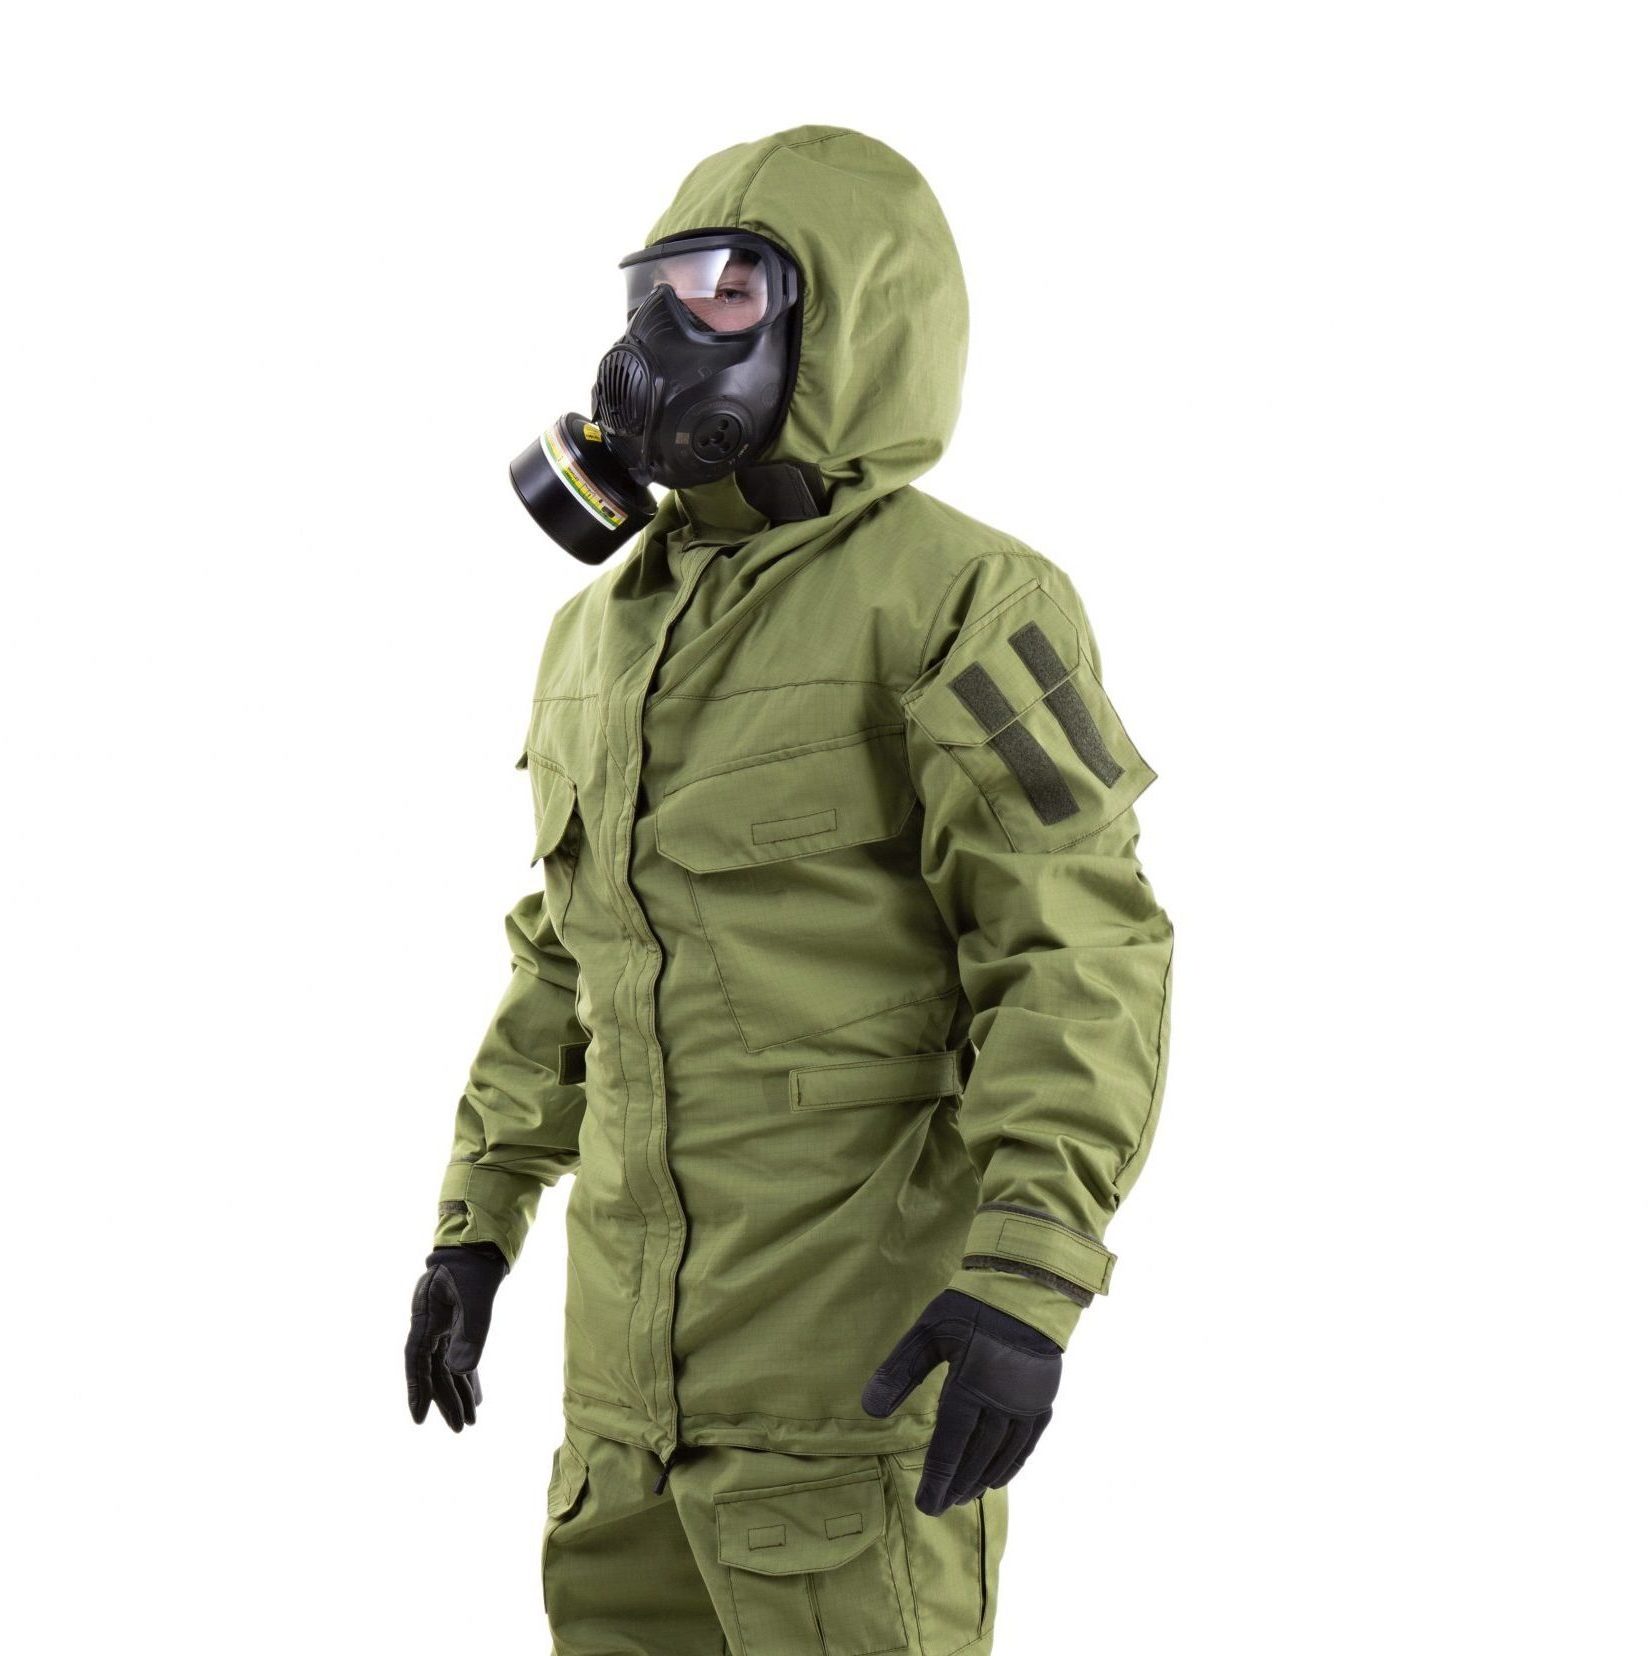 Home - OPEC CBRNe Protective CBRN Suits & Accessories